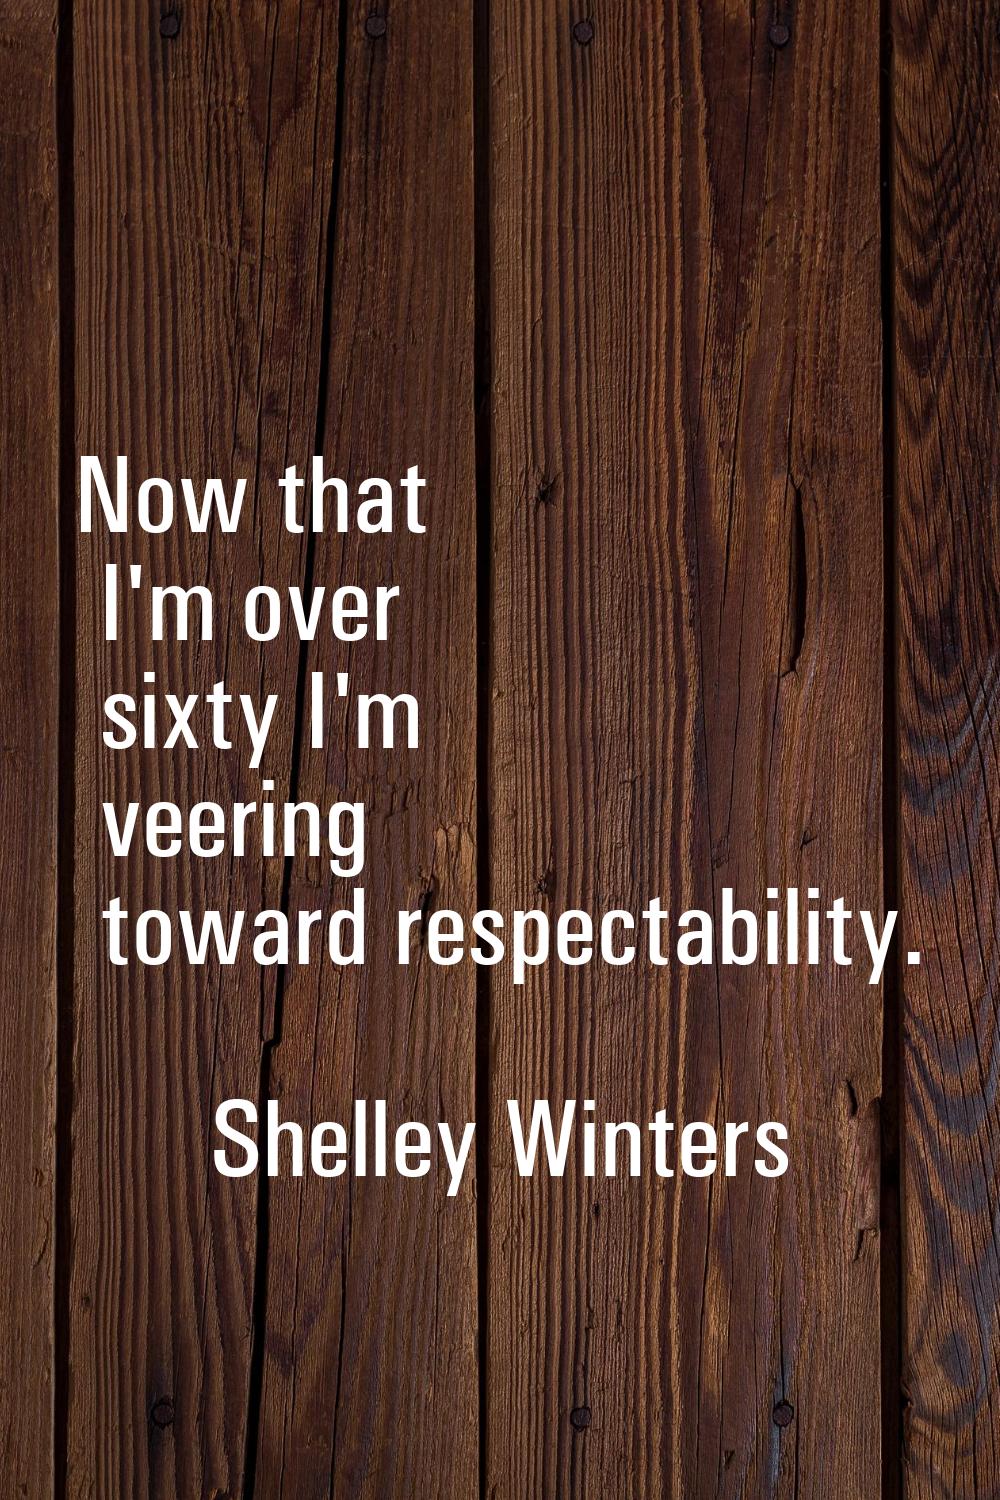 Now that I'm over sixty I'm veering toward respectability.